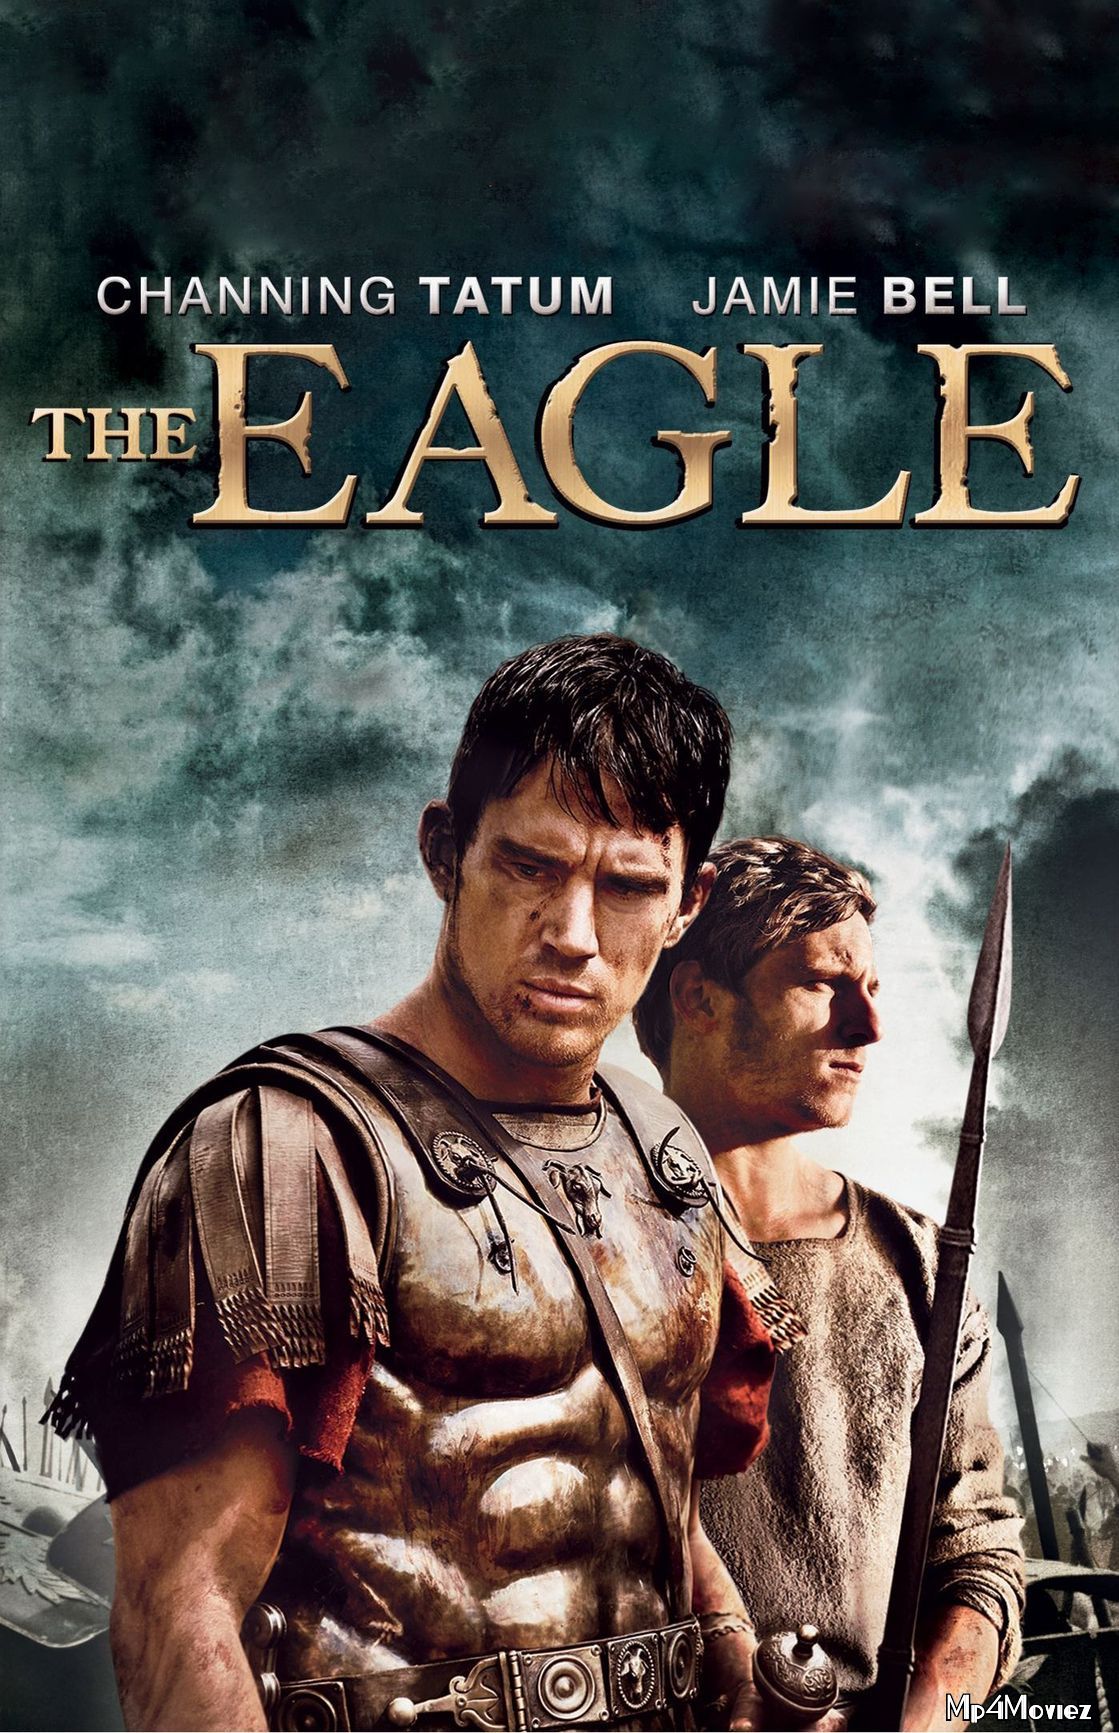 The Eagle 2011 Hindi Dubbed Movie download full movie